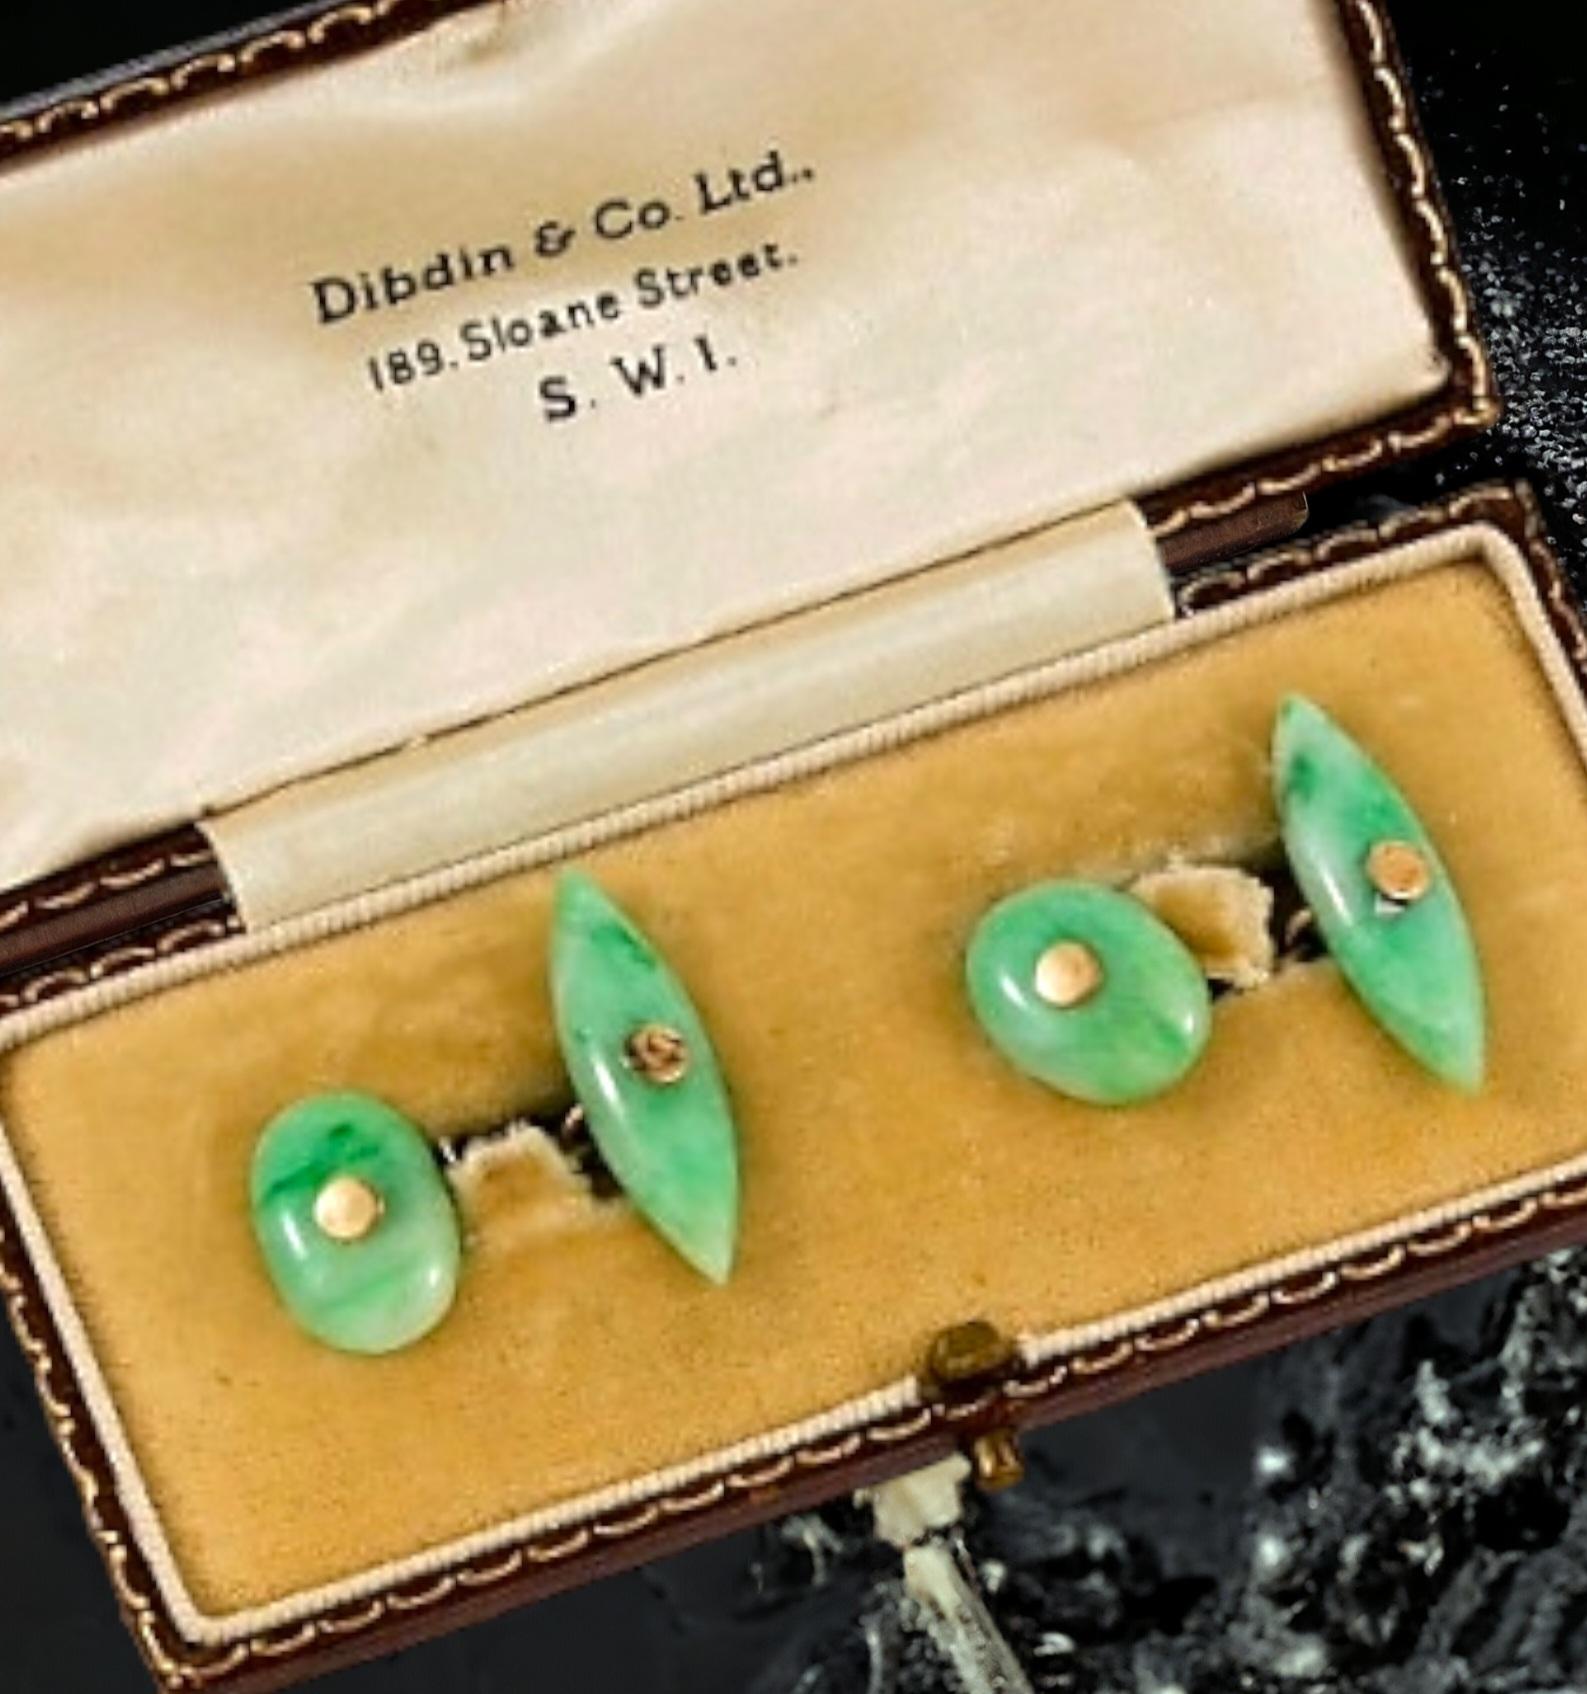 A PAIR JADEITE CUFFLINKS by Dibdin &Co Ltd (Sloane Street S.W.1) London
Jadeite double (4) cabochons Jadeite: 4 oval cabochons, 2 oval shaped measuring approximately 14.0 - 13 x 9mm and the other 2 marquise shaped measuring approximately 22x 7.0